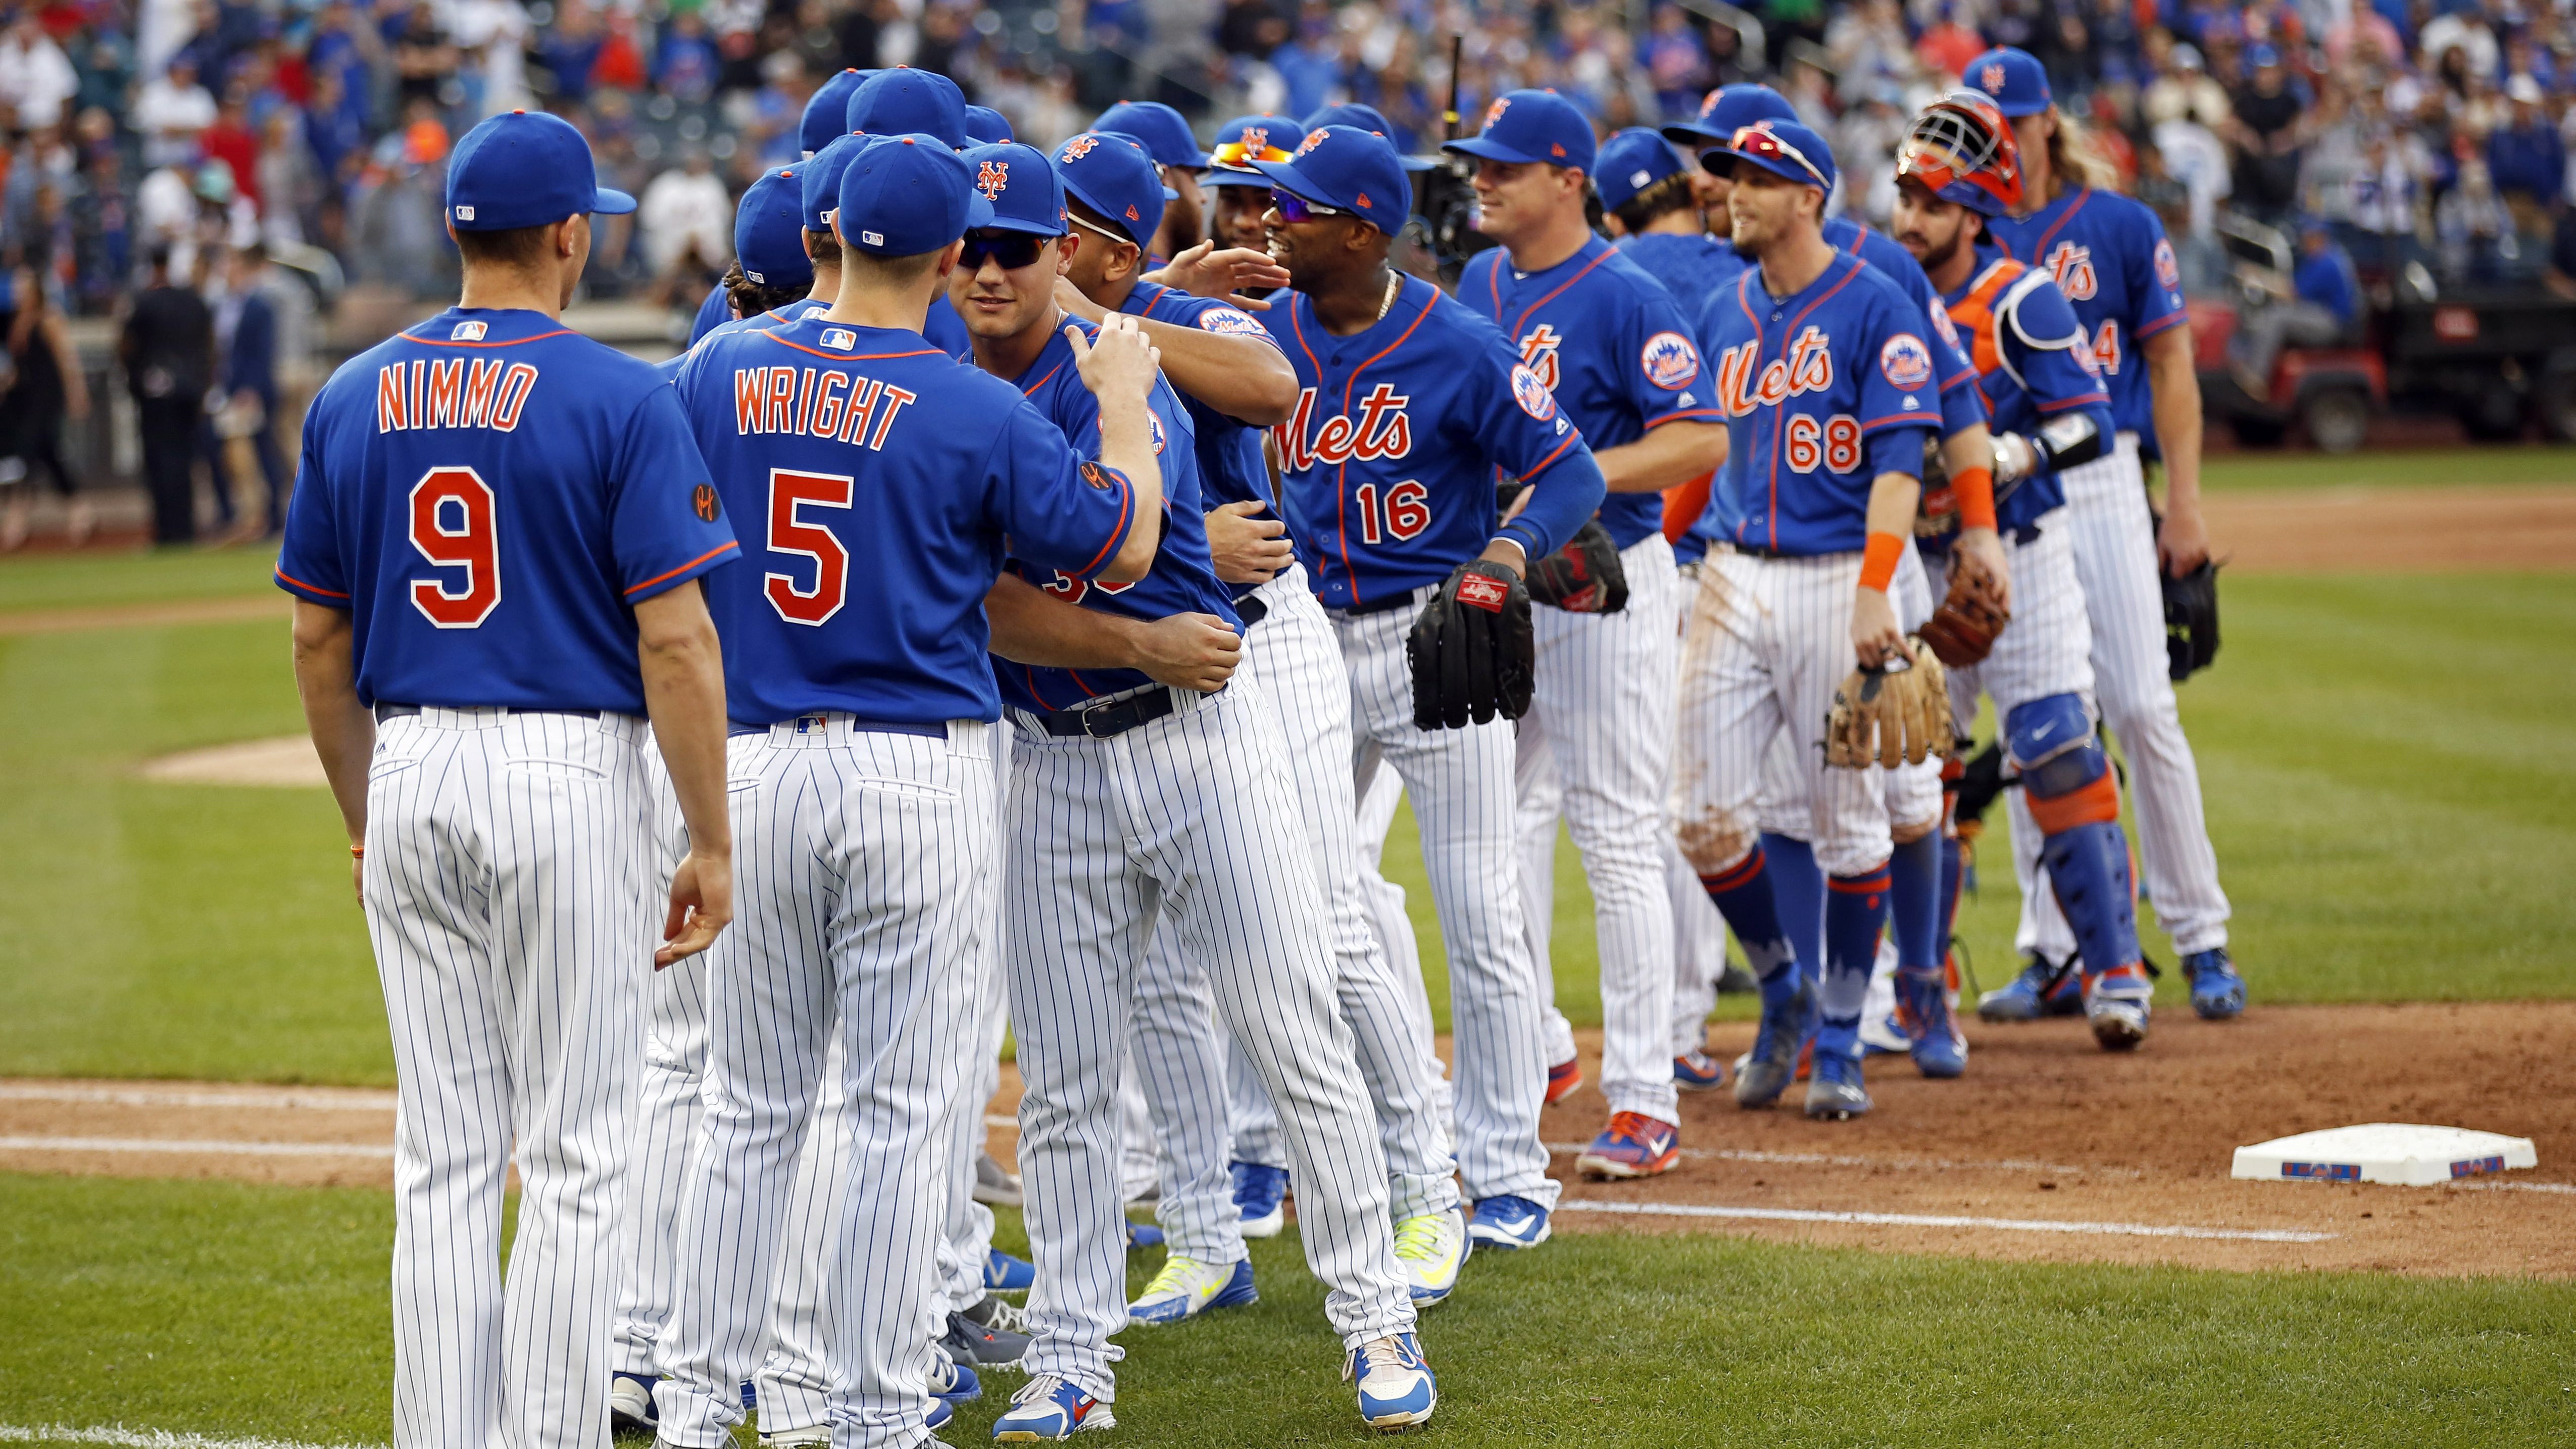 Mets Opening Day Lineup & Roster vs Nationals; Alonso & Cano Set to Debut